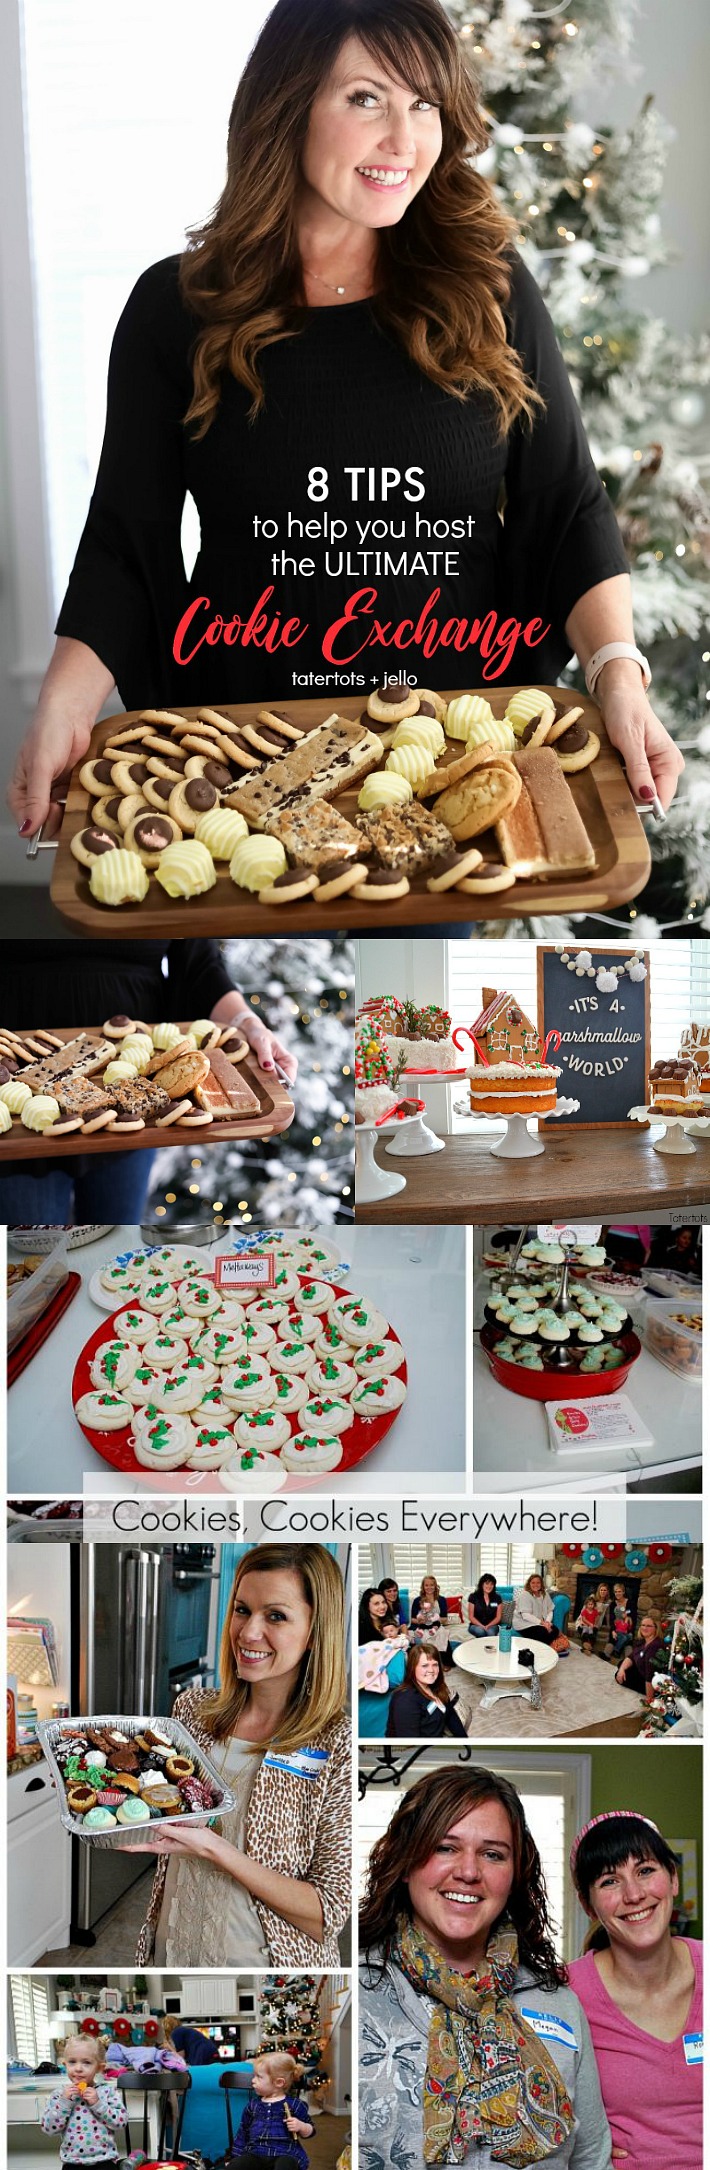 8 tips to help you throw the ultimate holiday cookie exchange party